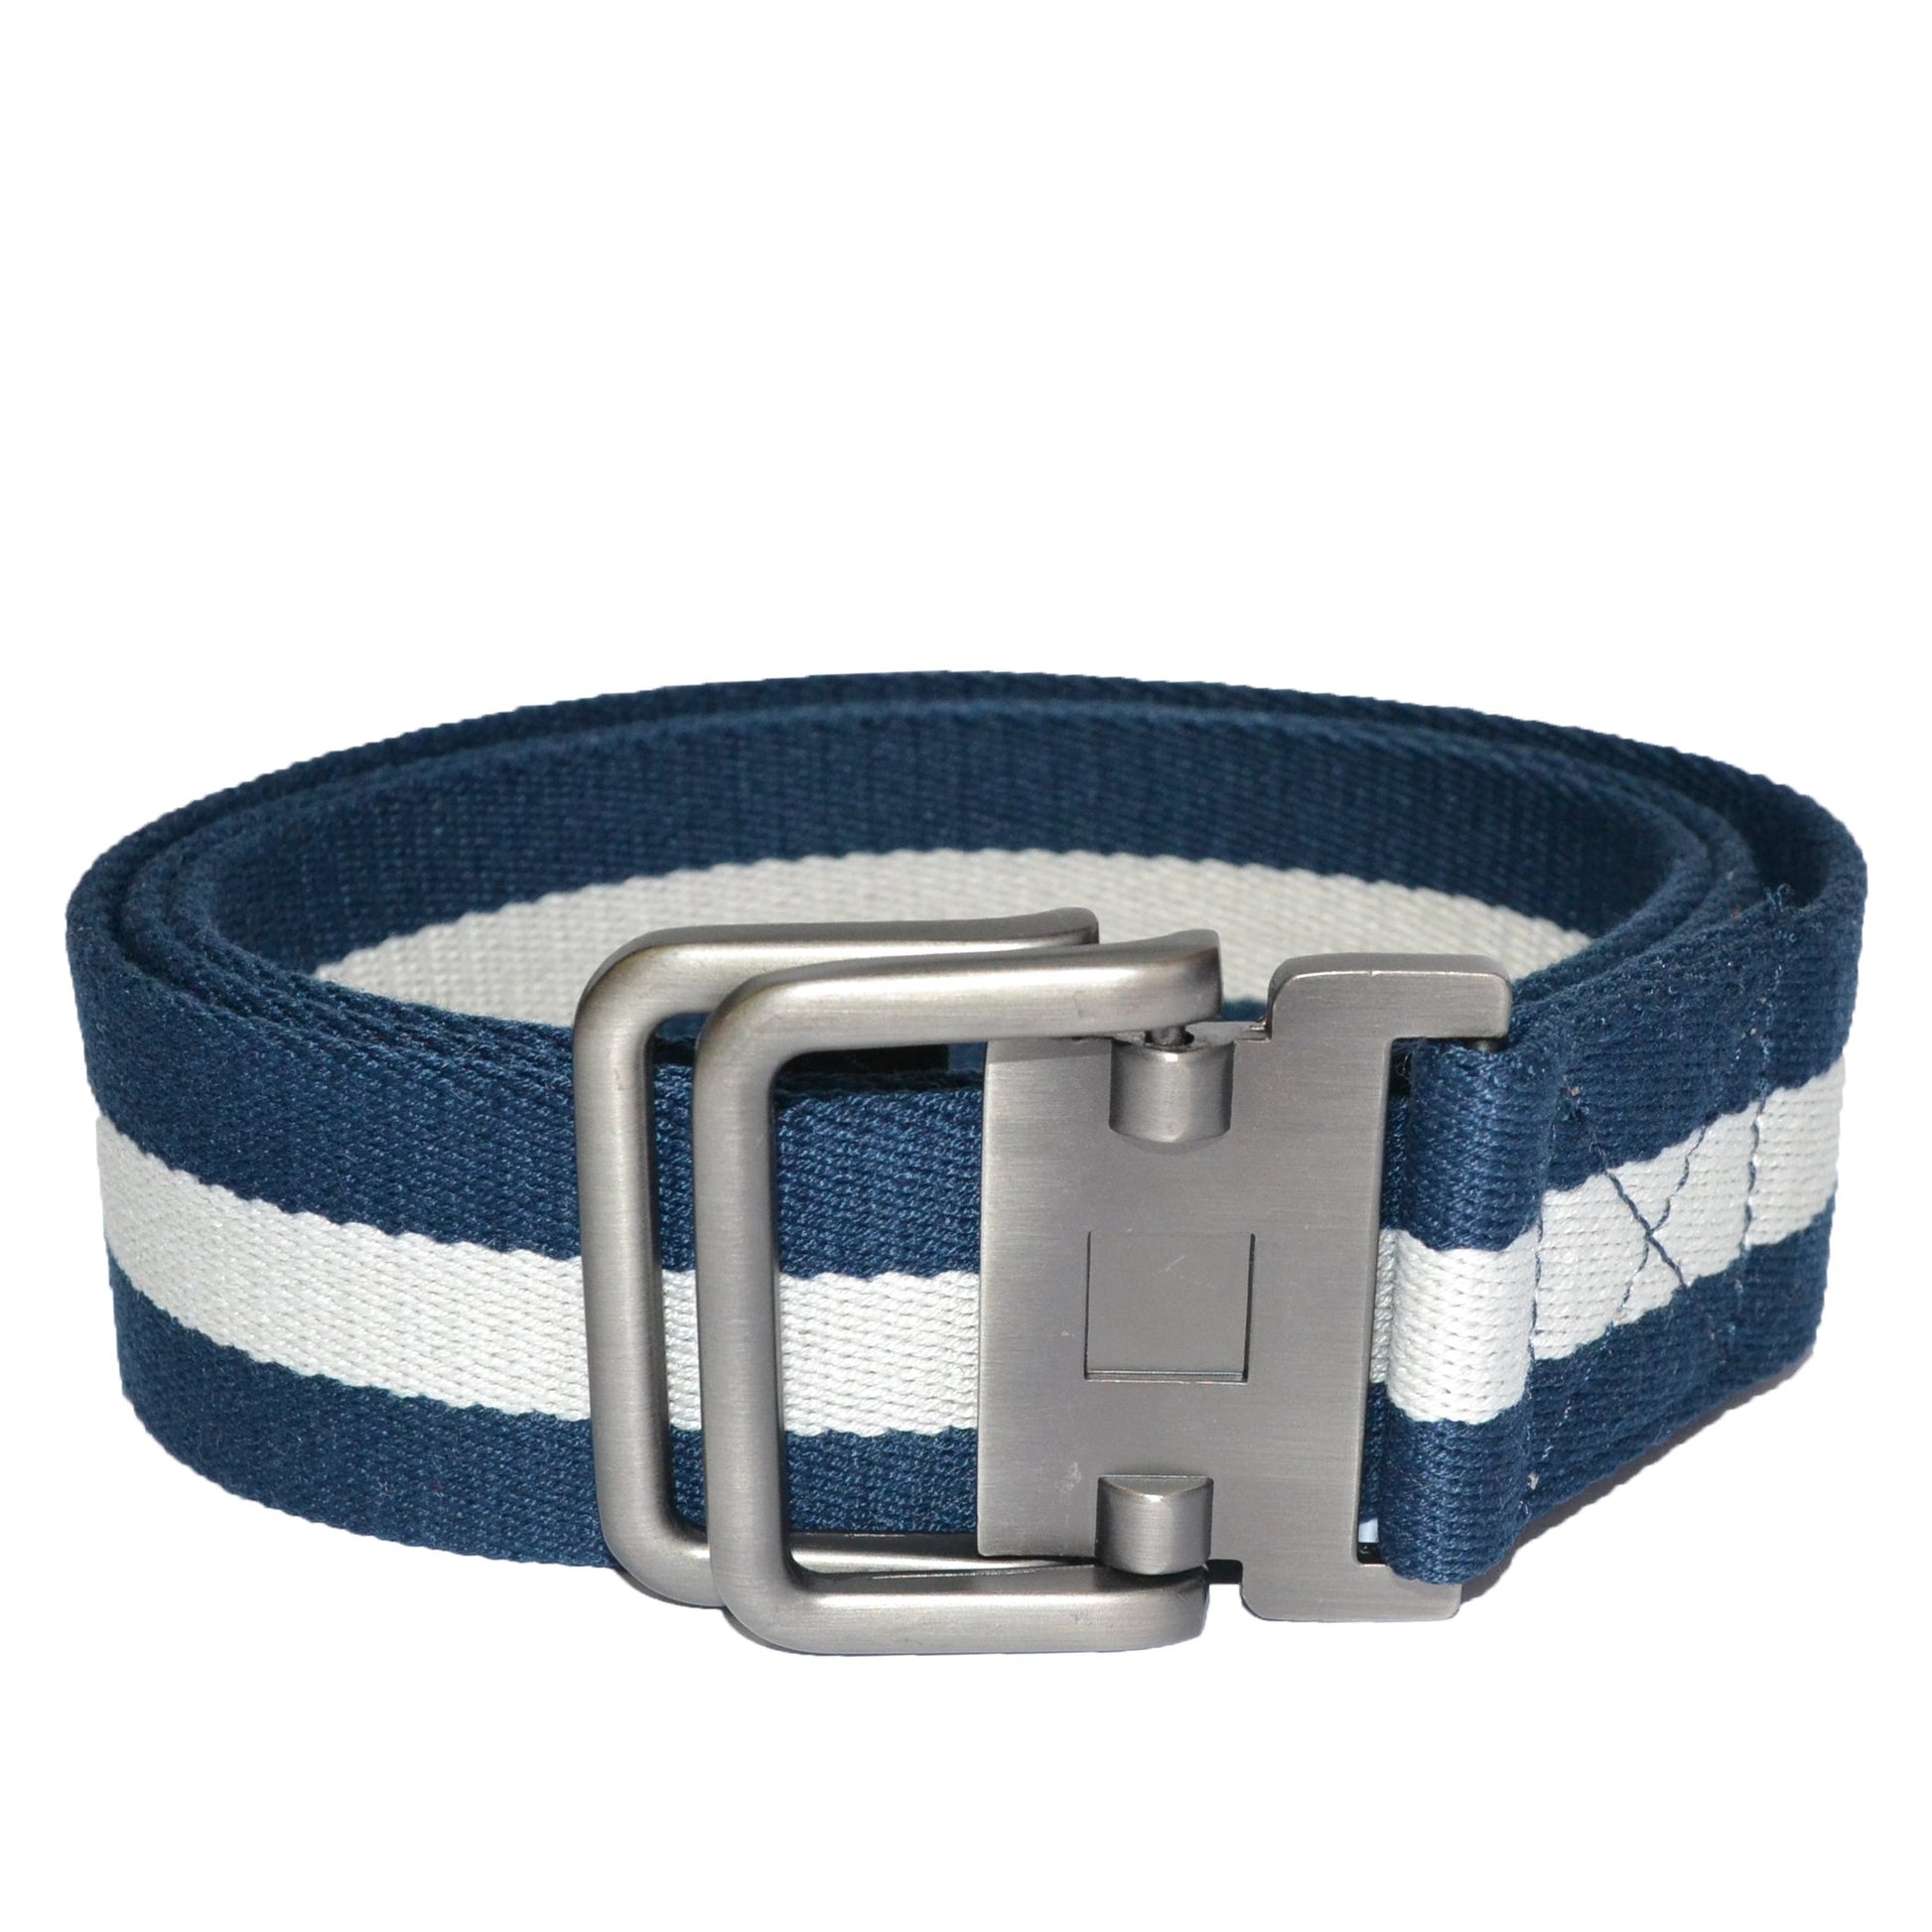 ZEUS - Mens Navy and White Cotton Canvas Webbing Belt with Slide Through Buckle - BeltNBags